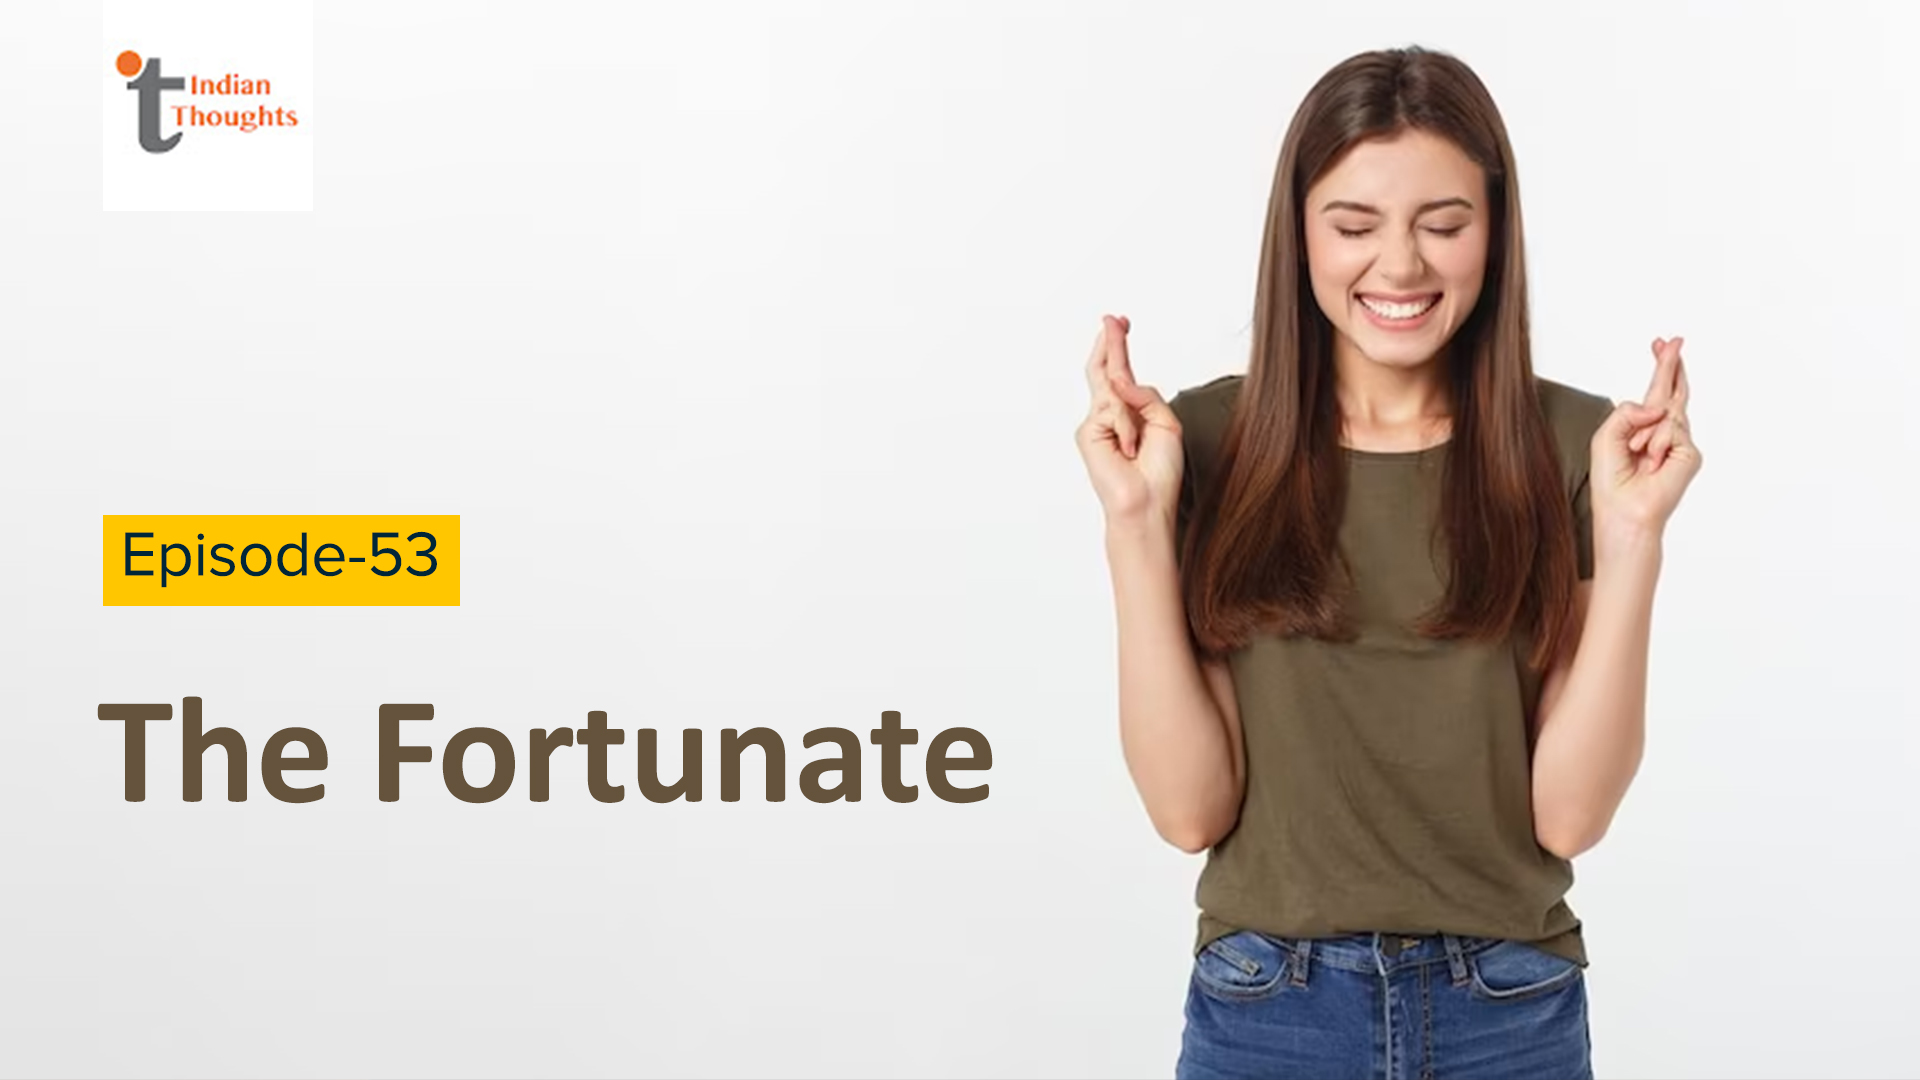 The fortunate